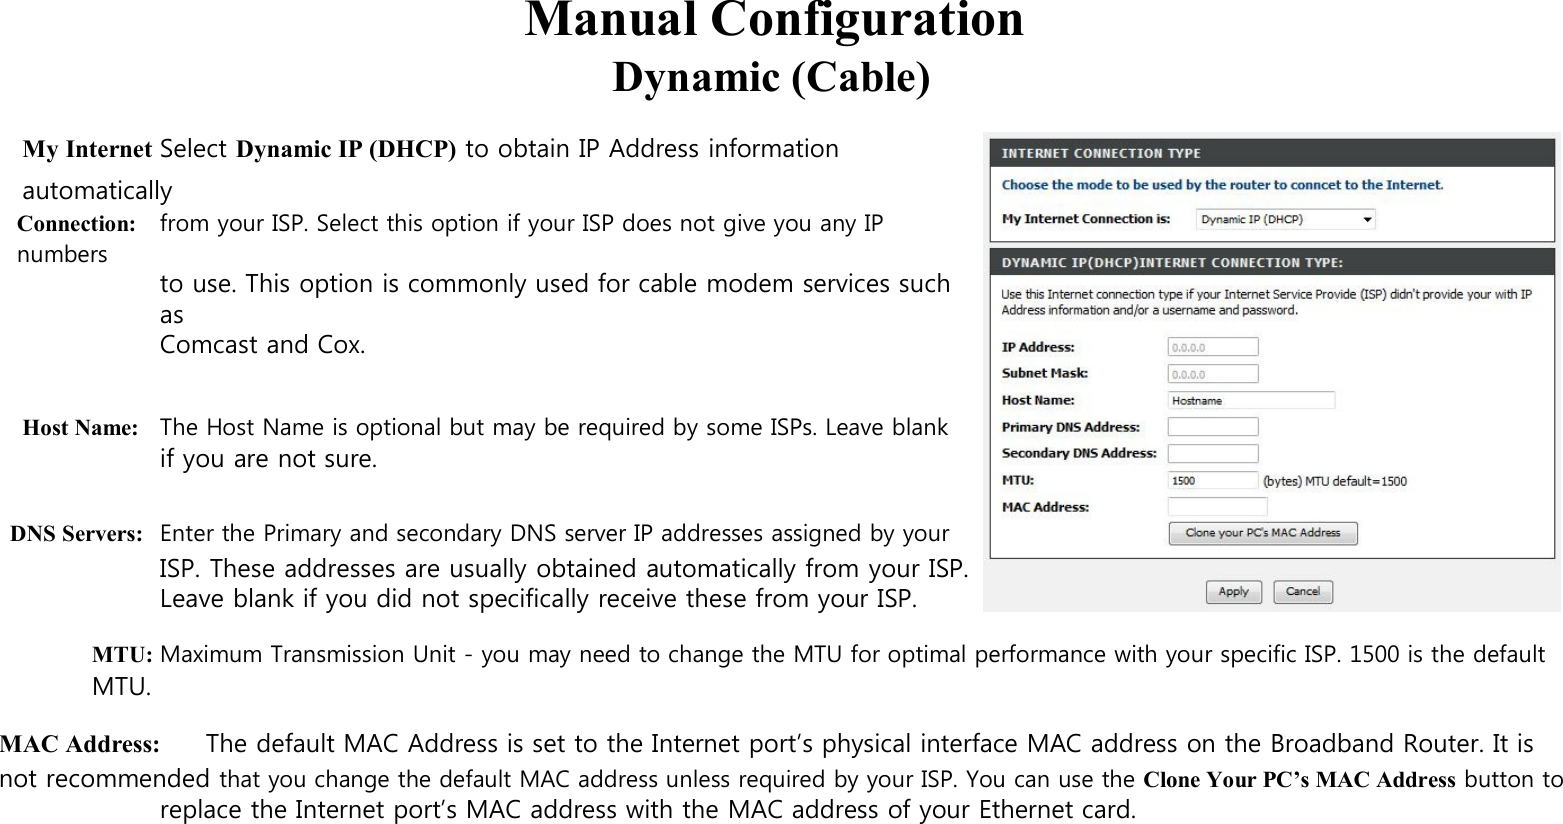   Manual Configuration Dynamic (Cable)  My Internet Select Dynamic IP (DHCP) to obtain IP Address information automatically Connection: from your ISP. Select this option if your ISP does not give you any IP numbers to use. This option is commonly used for cable modem services such as Comcast and Cox.   Host Name: The Host Name is optional but may be required by some ISPs. Leave blank if you are not sure.  DNS Servers: Enter the Primary and secondary DNS server IP addresses assigned by your ISP. These addresses are usually obtained automatically from your ISP. Leave blank if you did not specifically receive these from your ISP.  MTU: Maximum Transmission Unit - you may need to change the MTU for optimal performance with your specific ISP. 1500 is the default MTU.  MAC Address: The default MAC Address is set to the Internet port’s physical interface MAC address on the Broadband Router. It is not recommended that you change the default MAC address unless required by your ISP. You can use the Clone Your PC’s MAC Address button to replace the Internet port’s MAC address with the MAC address of your Ethernet card.               